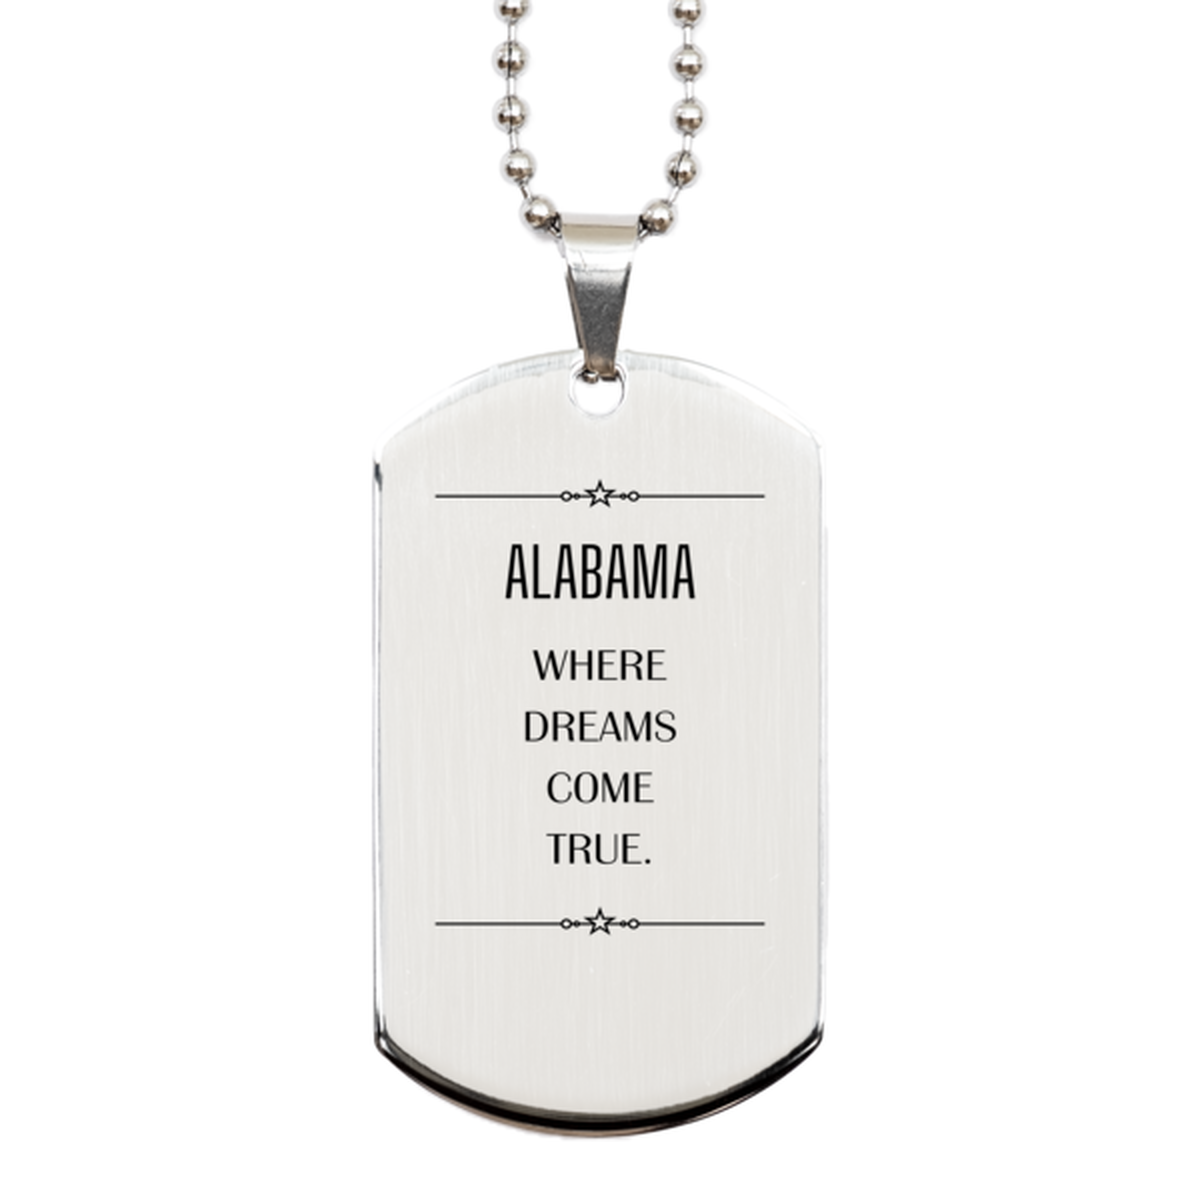 Love Alabama State Silver Dog Tag, Alabama Where dreams come true, Birthday Inspirational Gifts For Alabama Men, Women, Friends